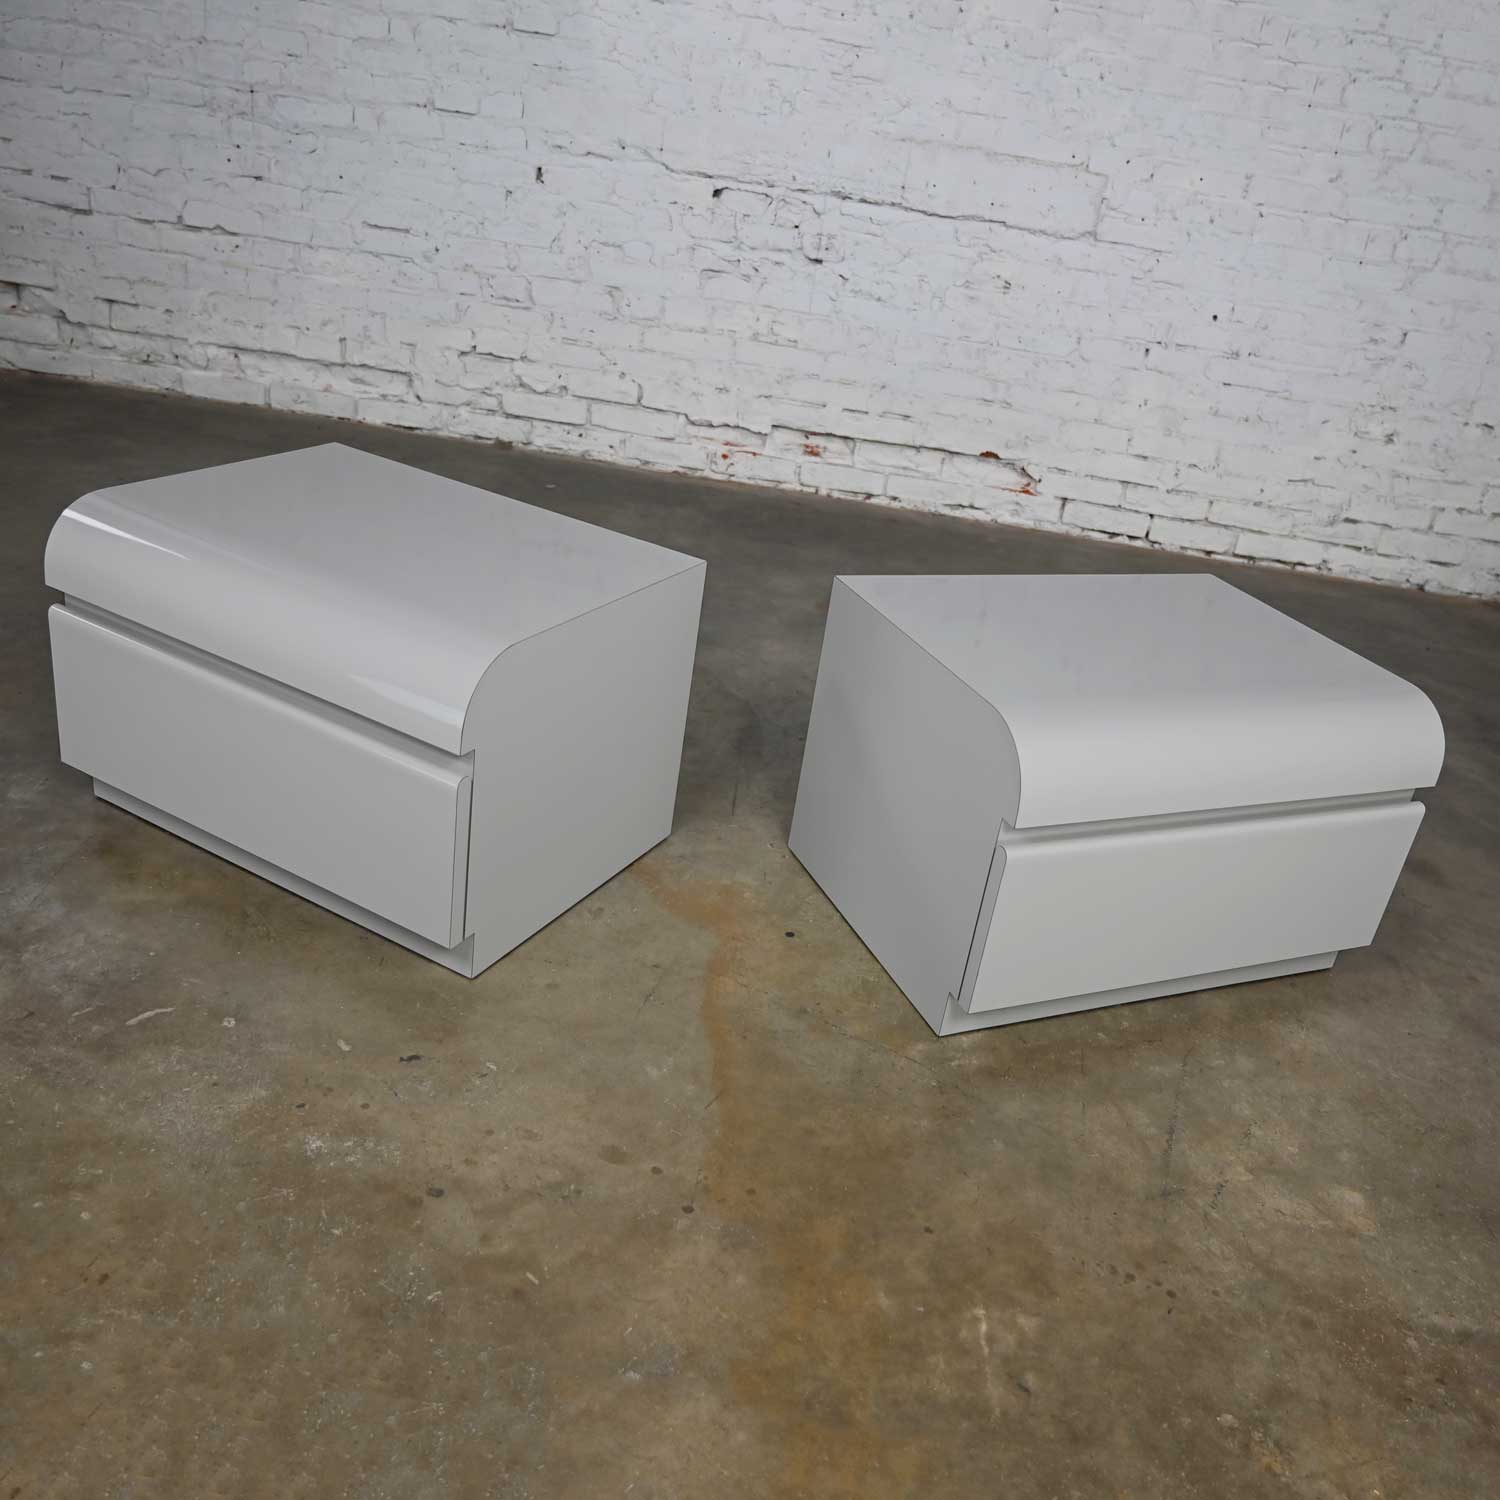 Modern Custom Built Light Gray Laminate Pair of Nightstands or End Table Cabinets by Center Displays of KCMO